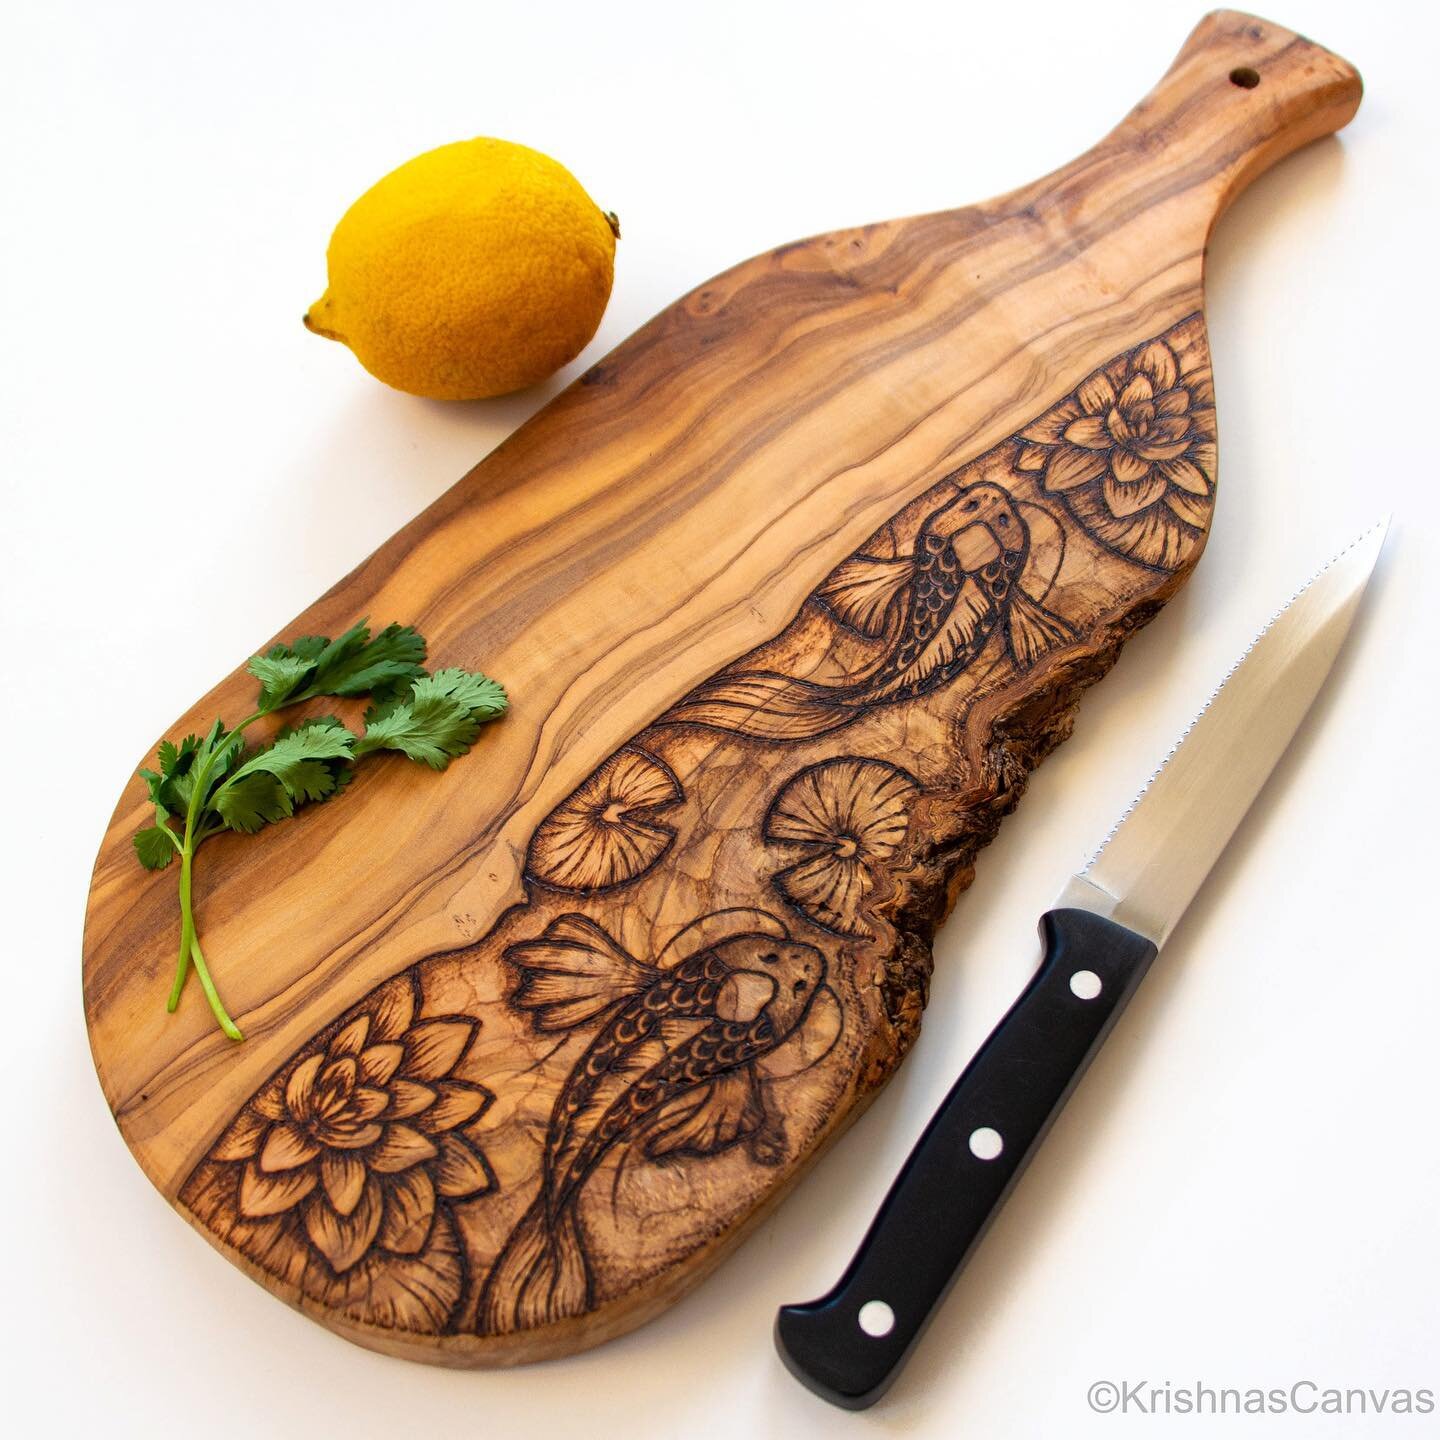 This koi fish cutting/serving board is burned on a beautiful piece of olive wood! Just look at those grains and a bit of bark on the side! 

I extended my Black Friday deal till Saturday 12/3! Get 10% off all ready-made wood products with the discoun